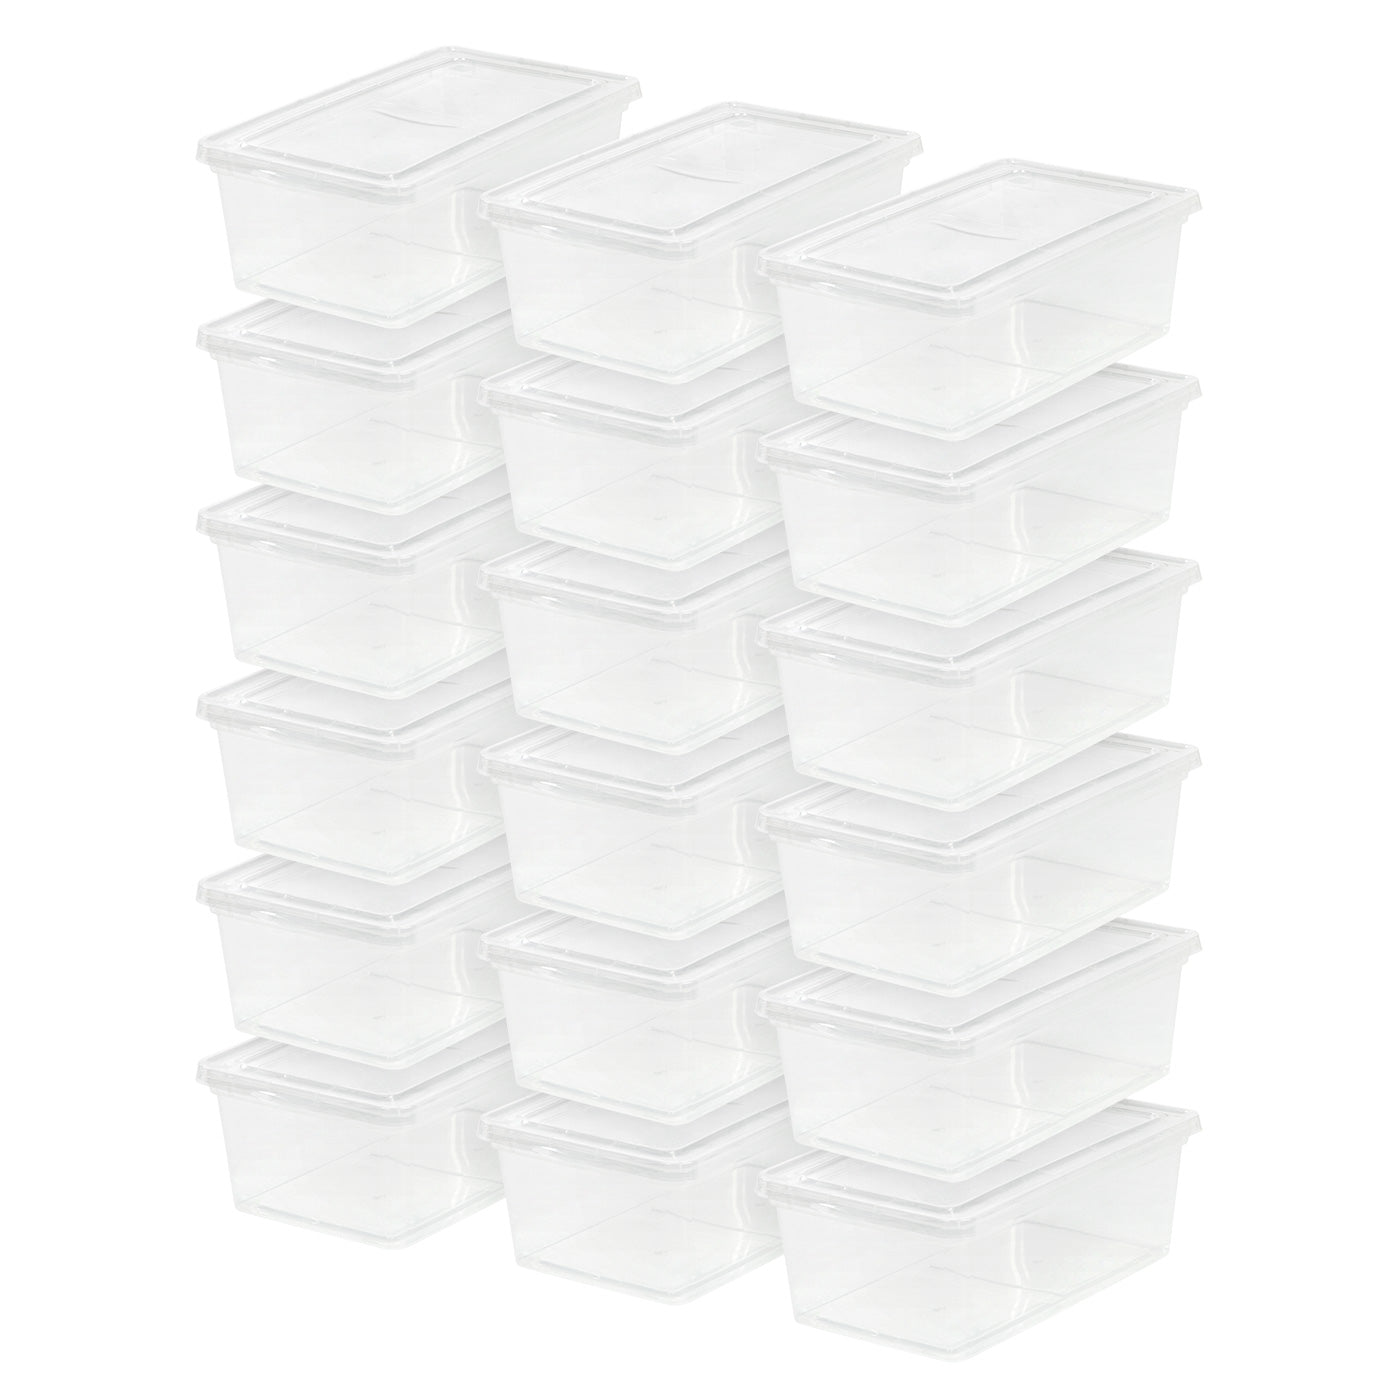  Cetomo 18Qt*6 Plastic Storage Bins, Storage Box, 6 Pack,  Organizing Container with Durable Lids and Secure Latching Buckles,  Stackable and Nestable, Clear with Black Buckle : Everything Else